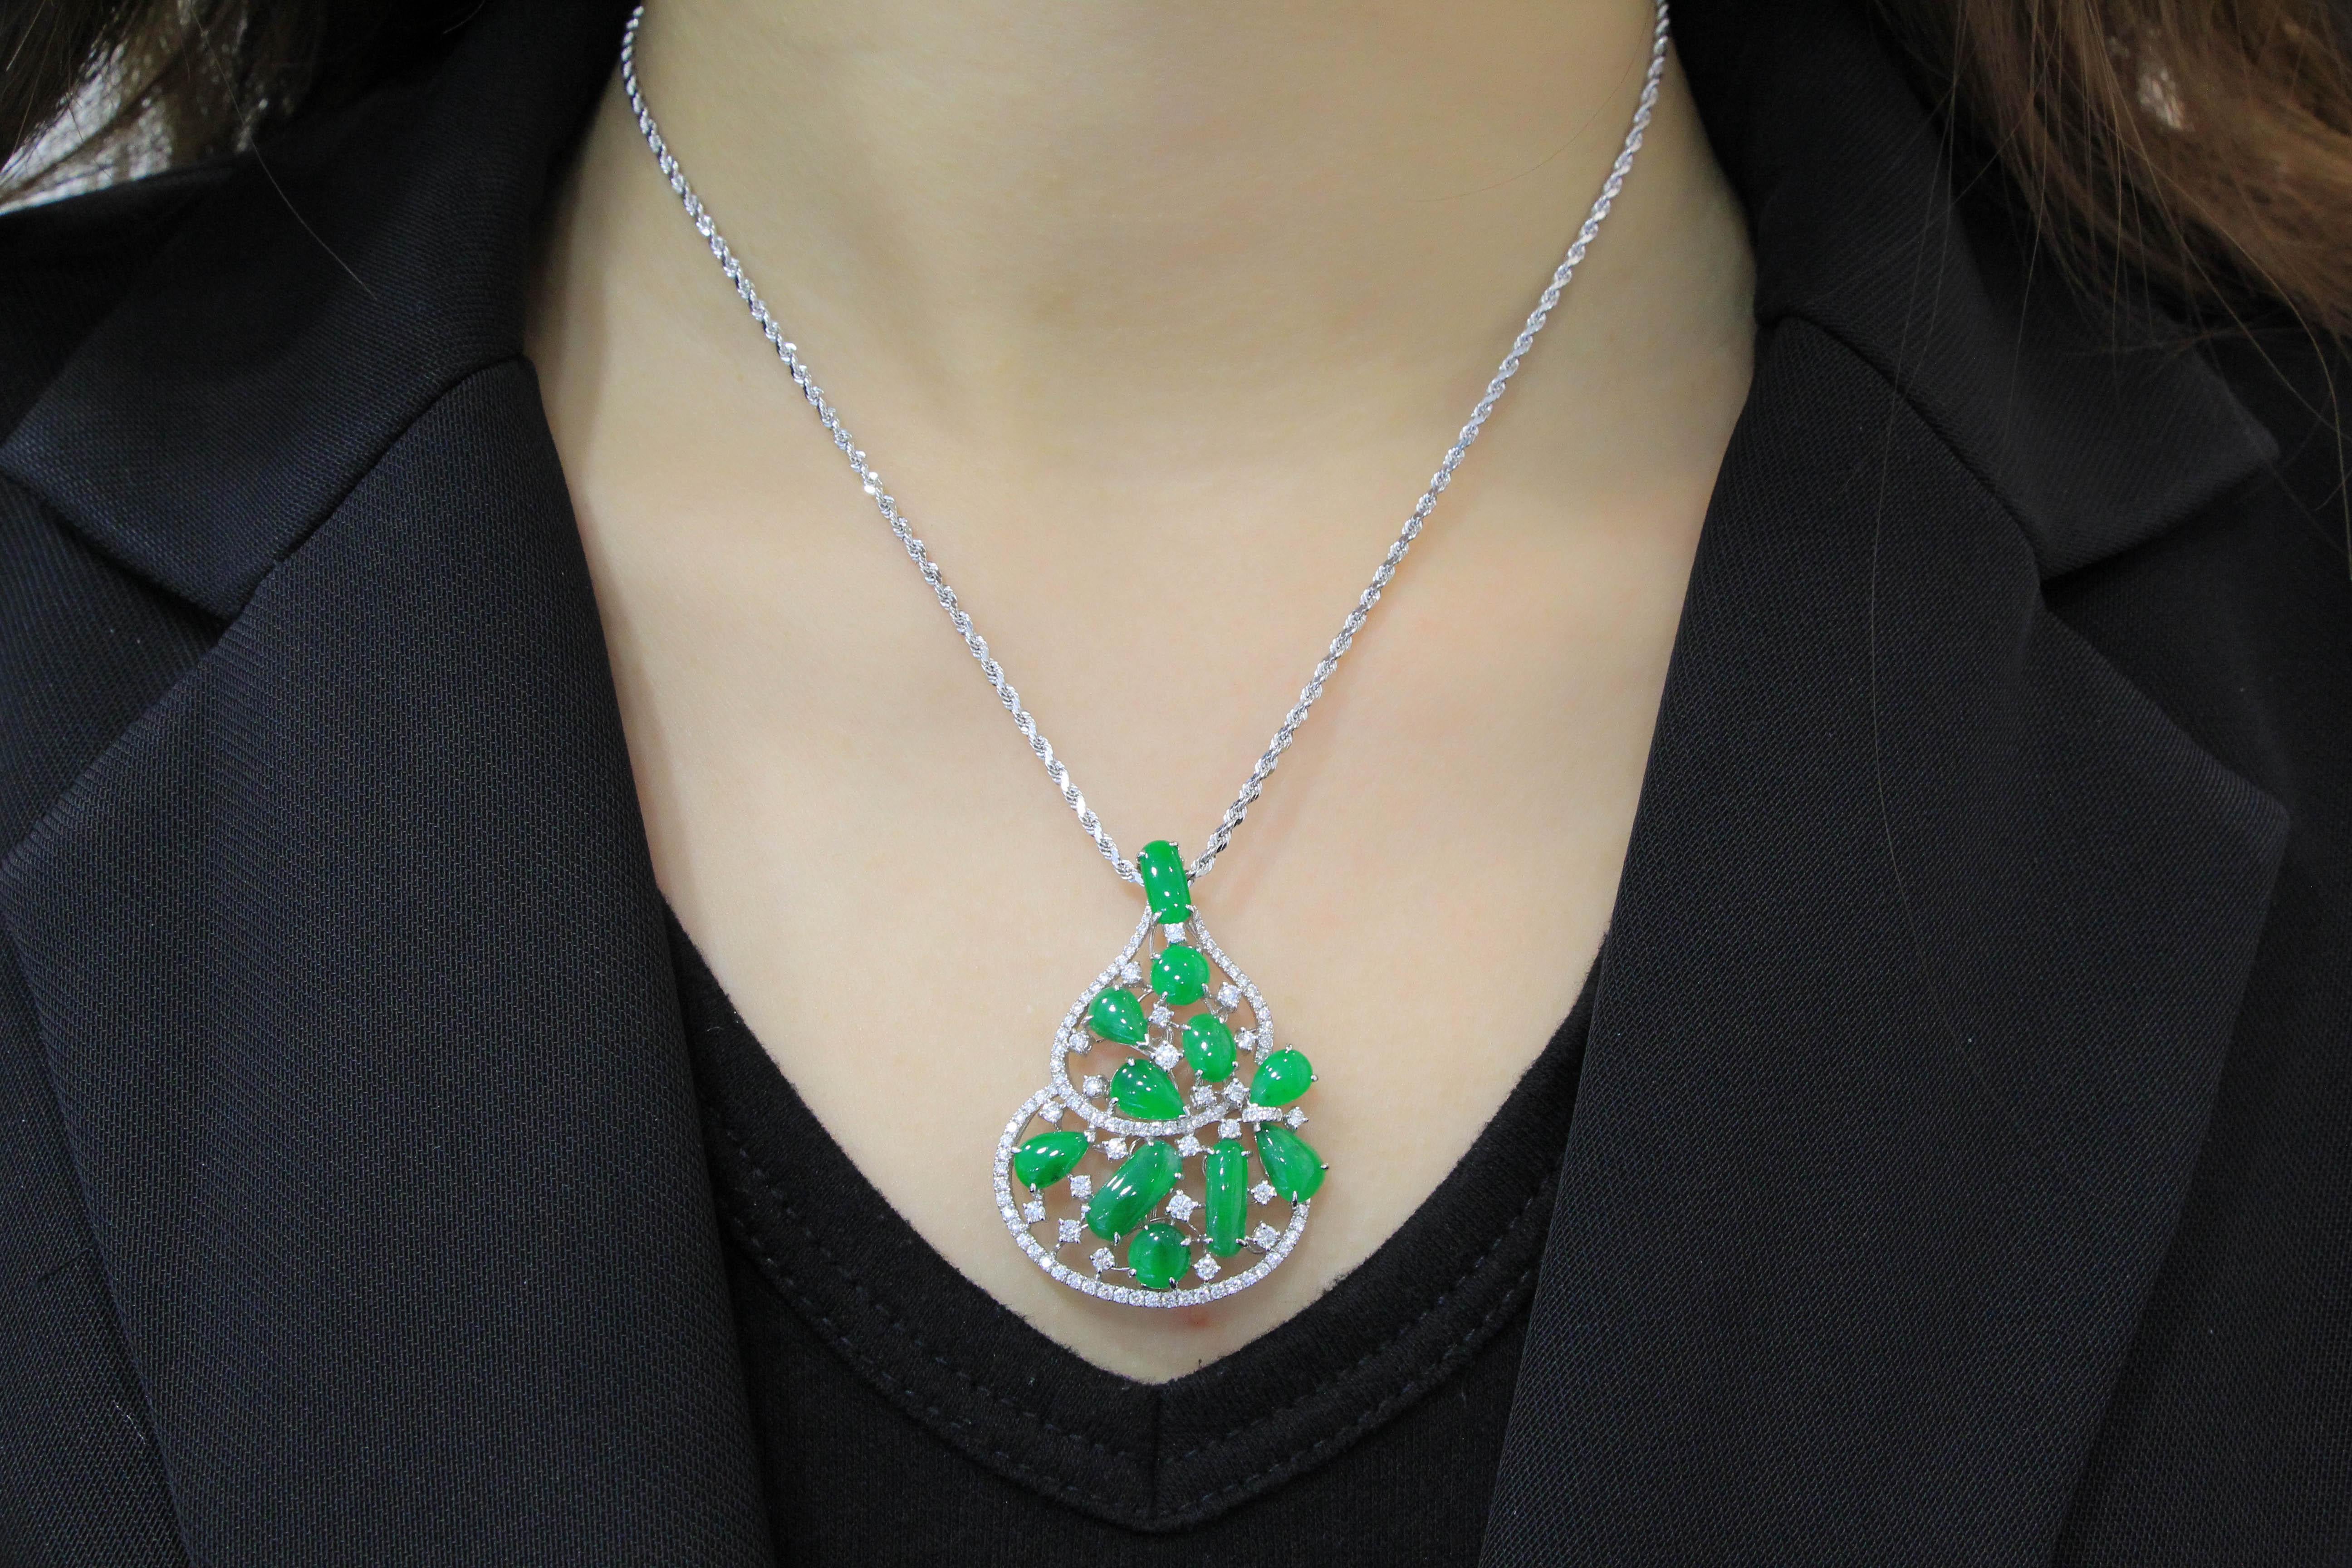 18 Karat White Gold Jadeite and Diamond Brooch and Pendant with Necklace In New Condition For Sale In Macau, MO